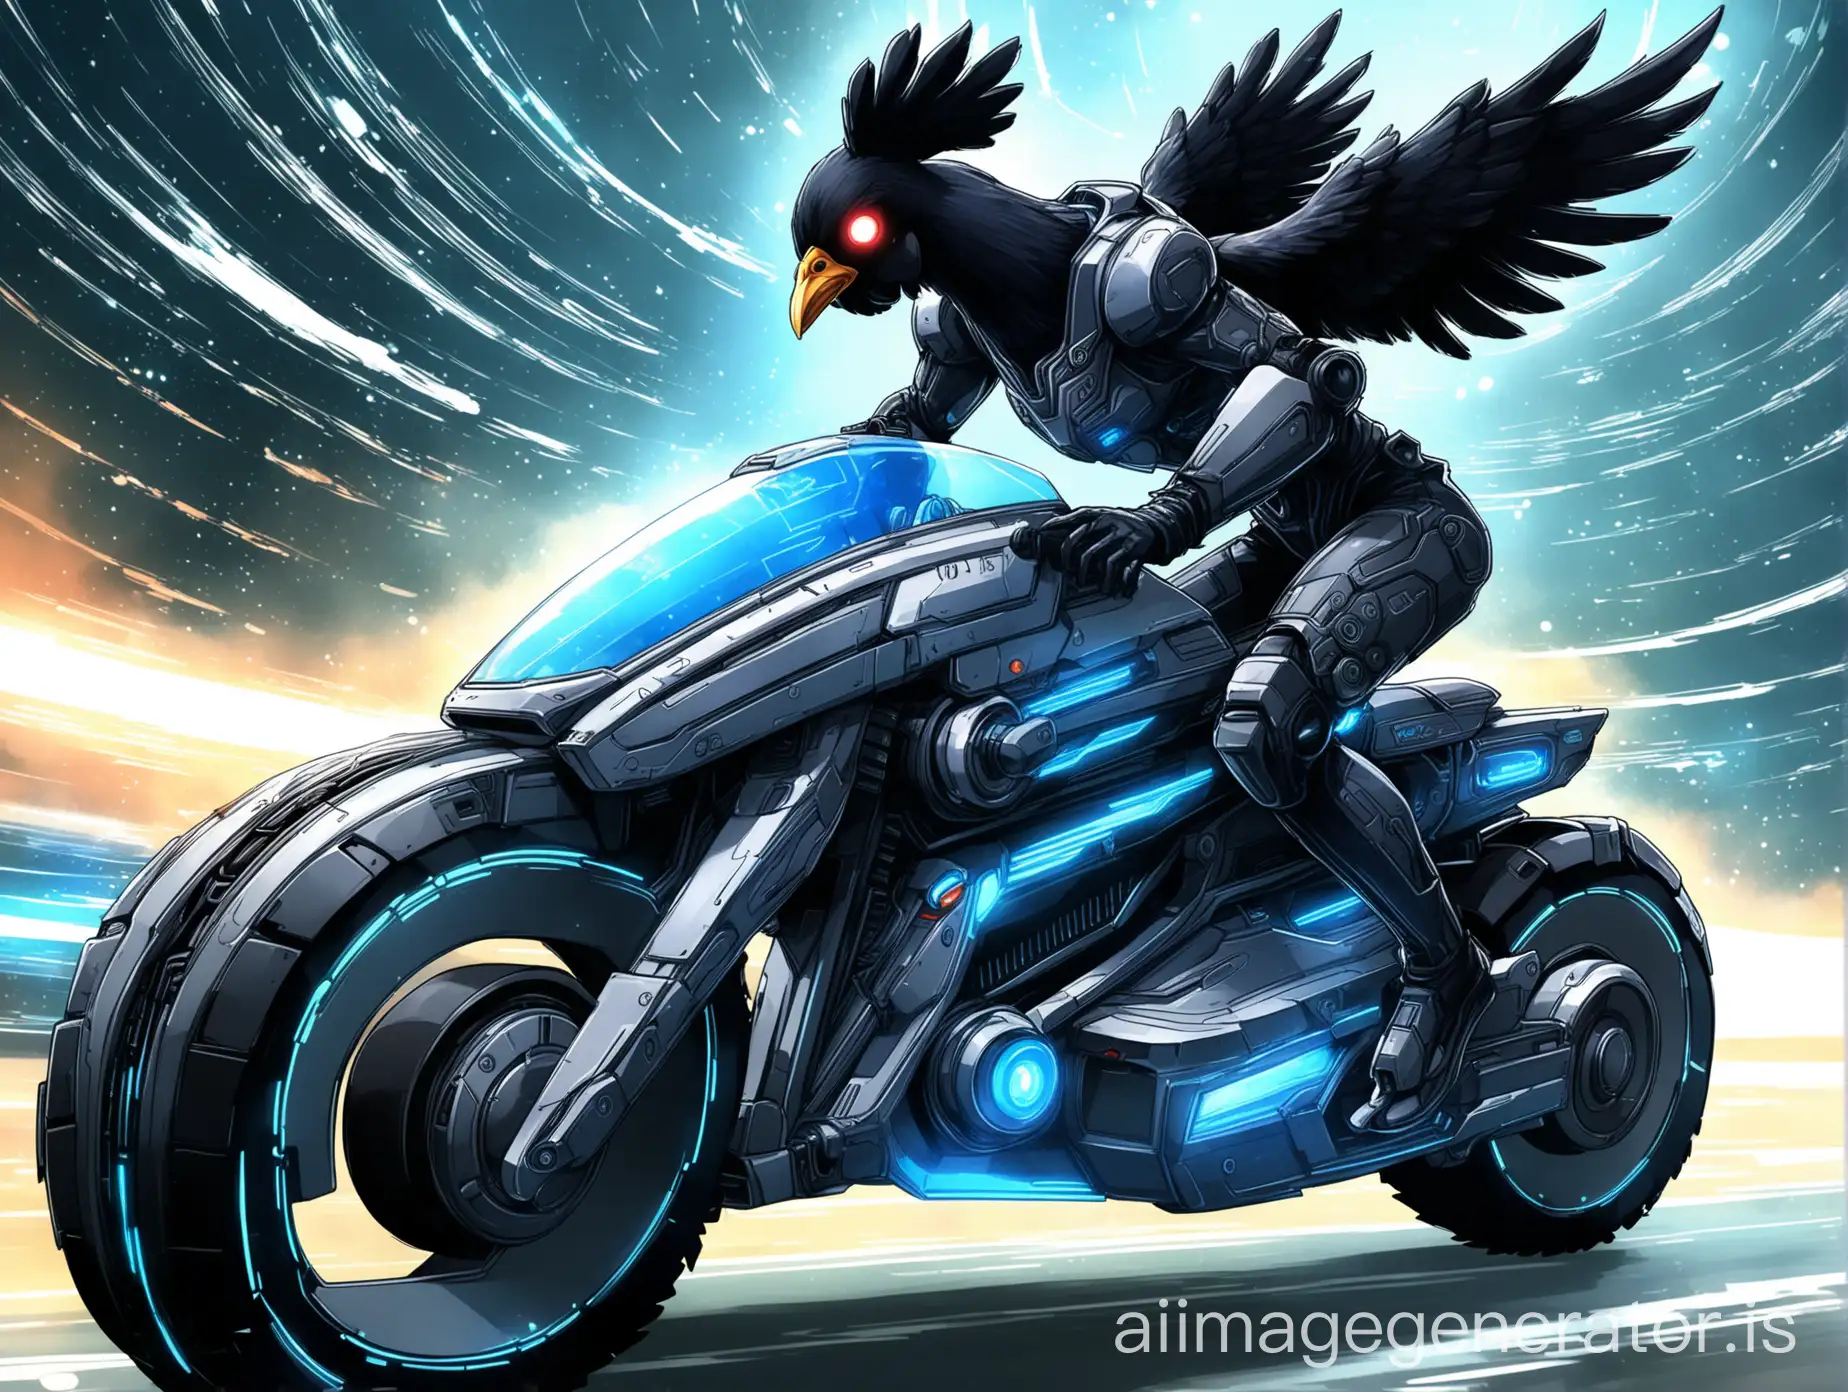 ANIME STYLE, BLACK CHICKEN DRIVING A FUTURISTIC MOTORCYCLE INSPIRED BY INFINITY BY CORVUS BELLI